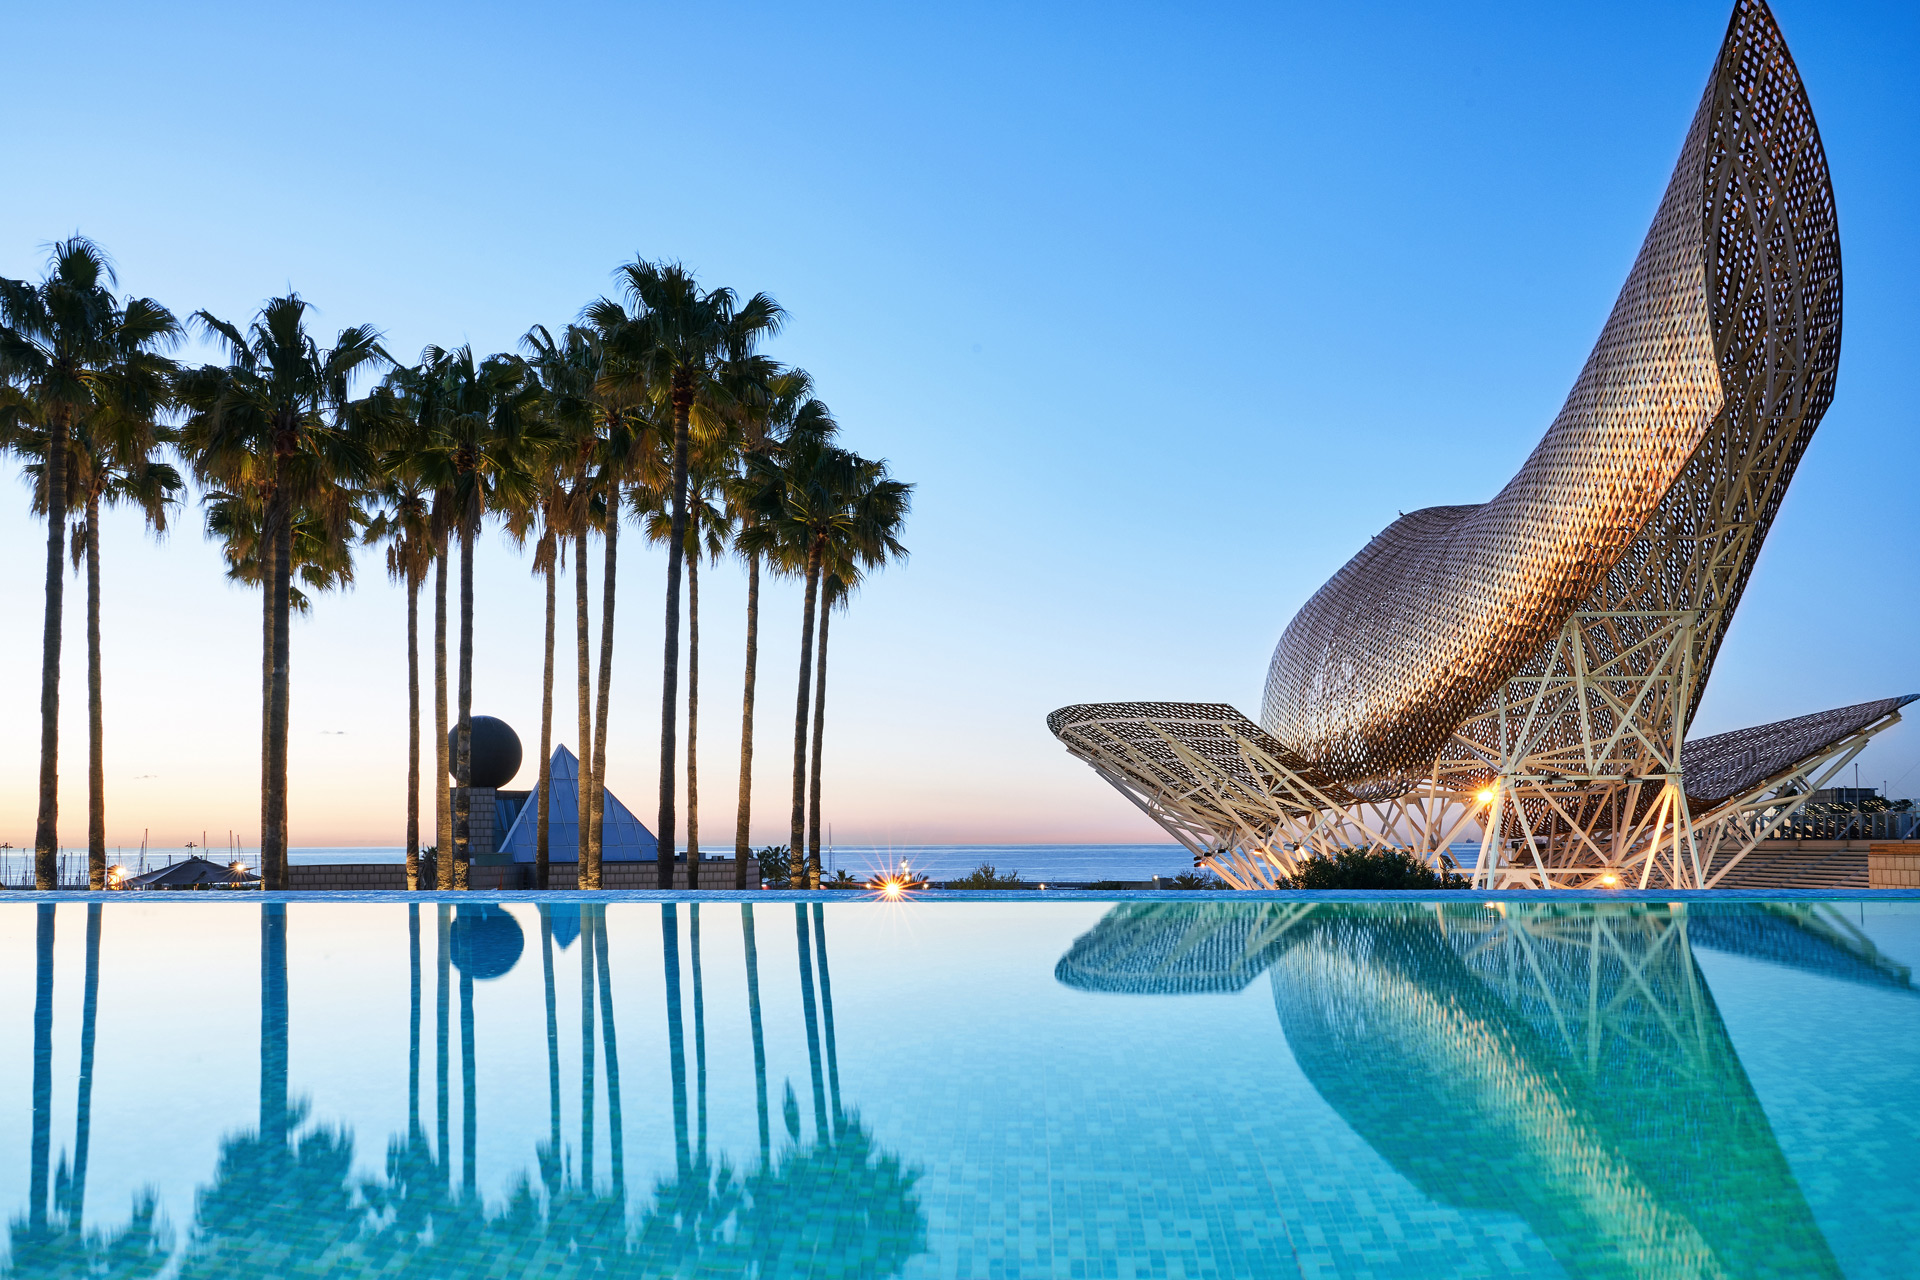 Infinity pool with gold sculpture at Hotel Arts Barcelona